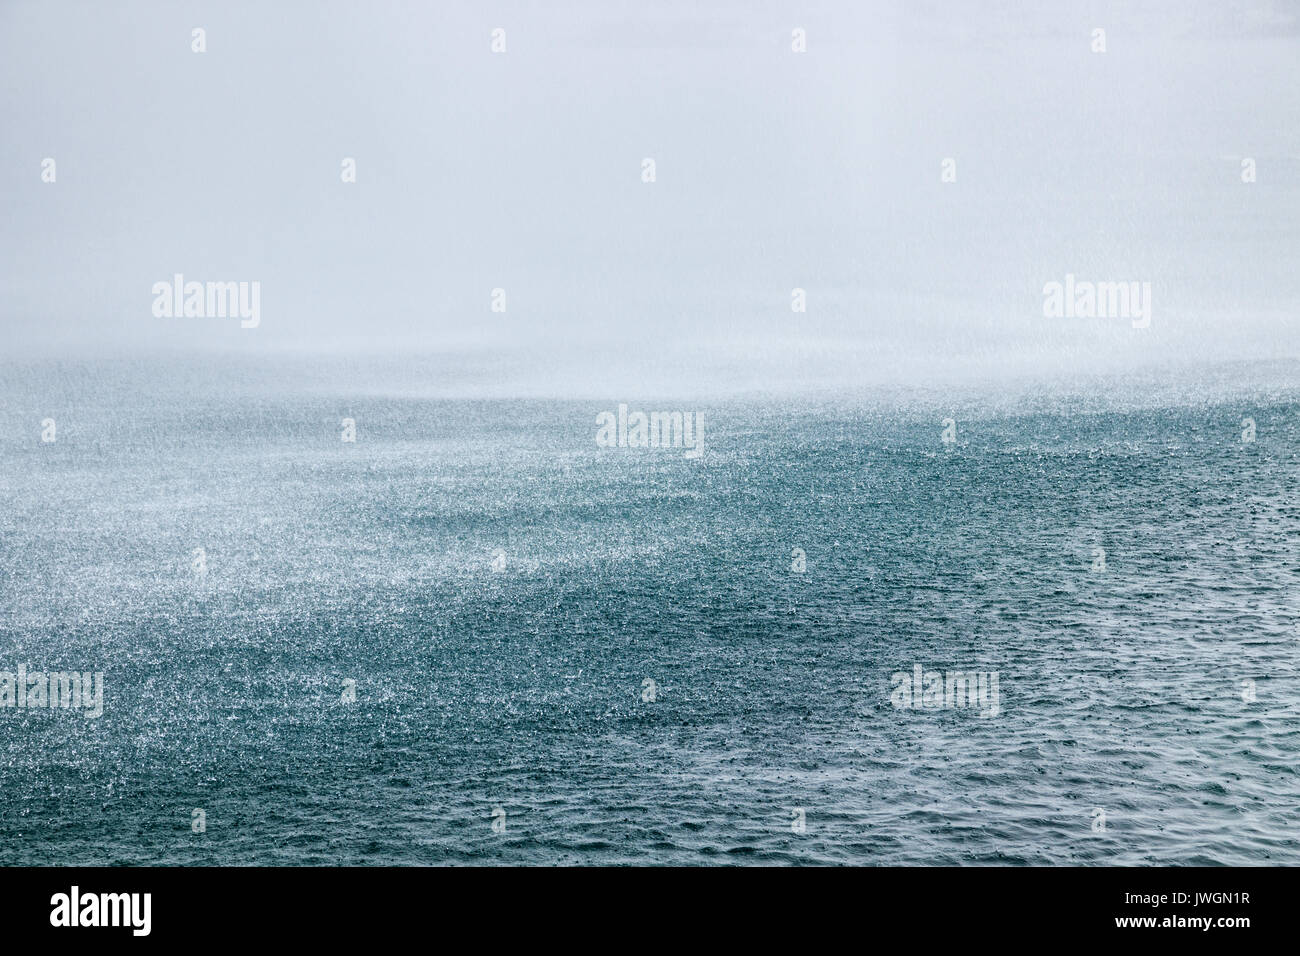 Heavy rainfall on a water surface. Stock Photo